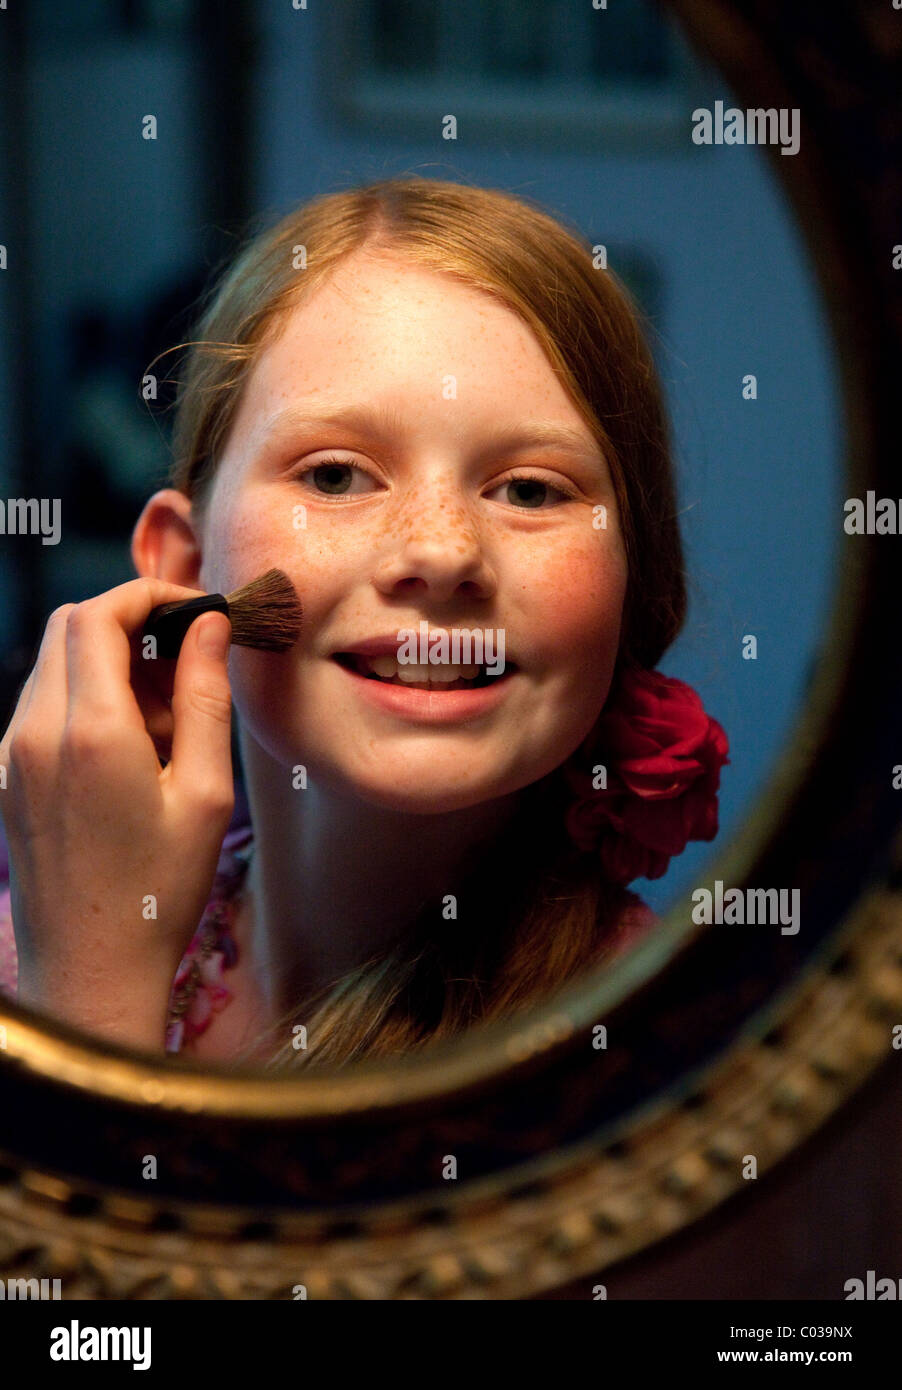 11 year old girl putting on make-up Stock Photo